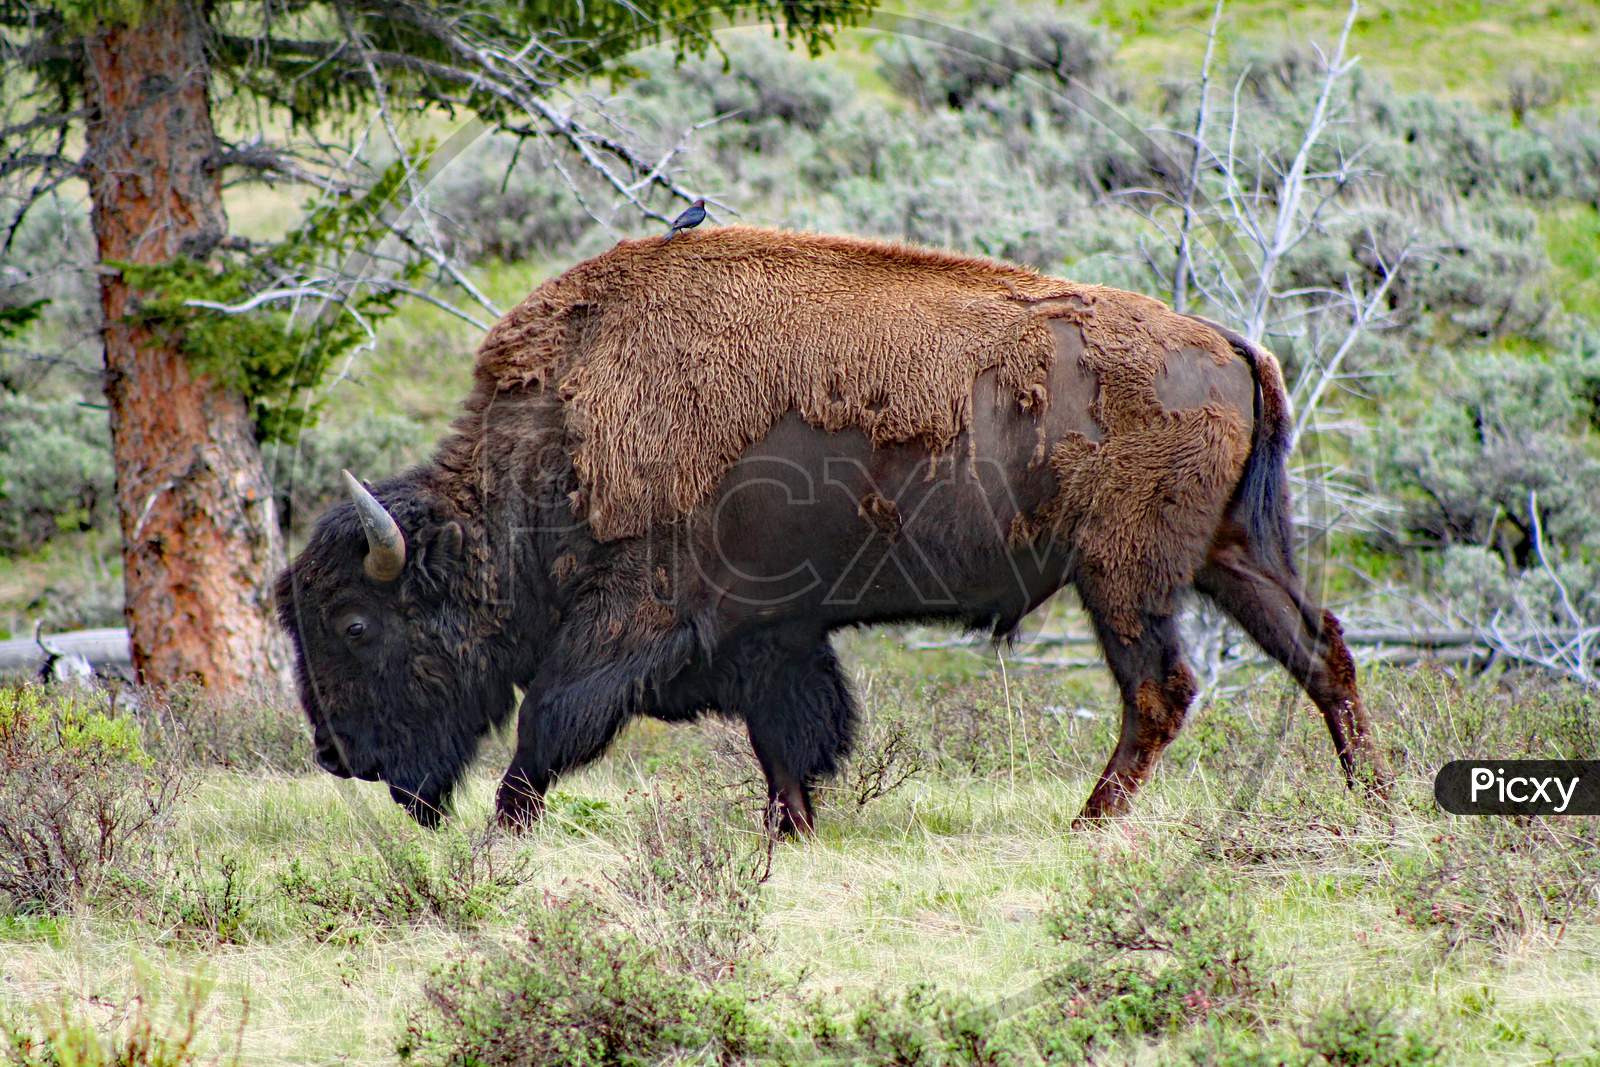 Bison With A Passenger (Wy 00729)